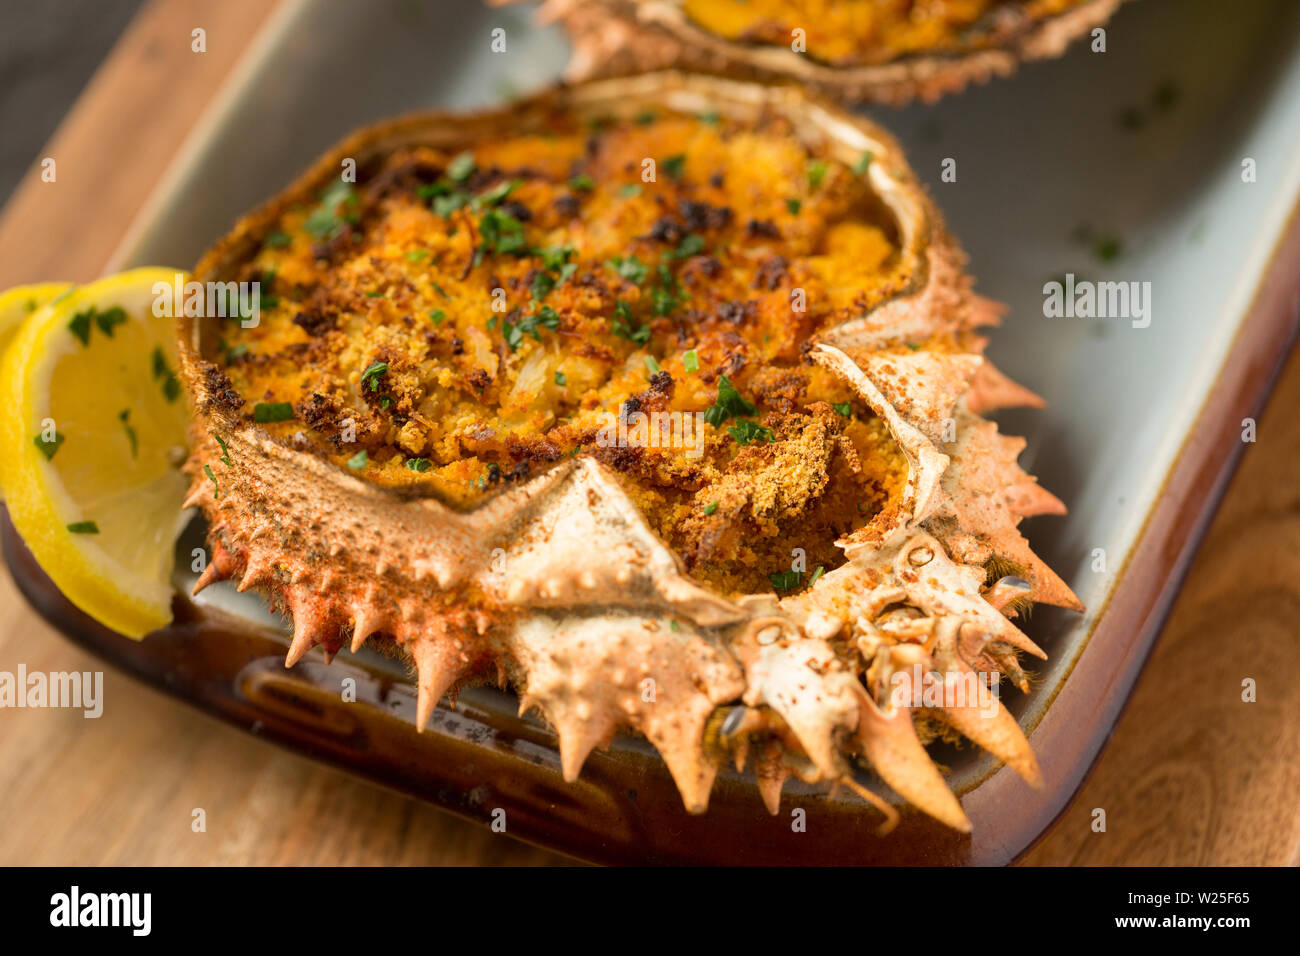 A homemade dish of baked spider crab based on the Basque dish of Txangurro or Changurro. The spider crab, Maja brachydactyla, was caught in the Englis Stock Photo